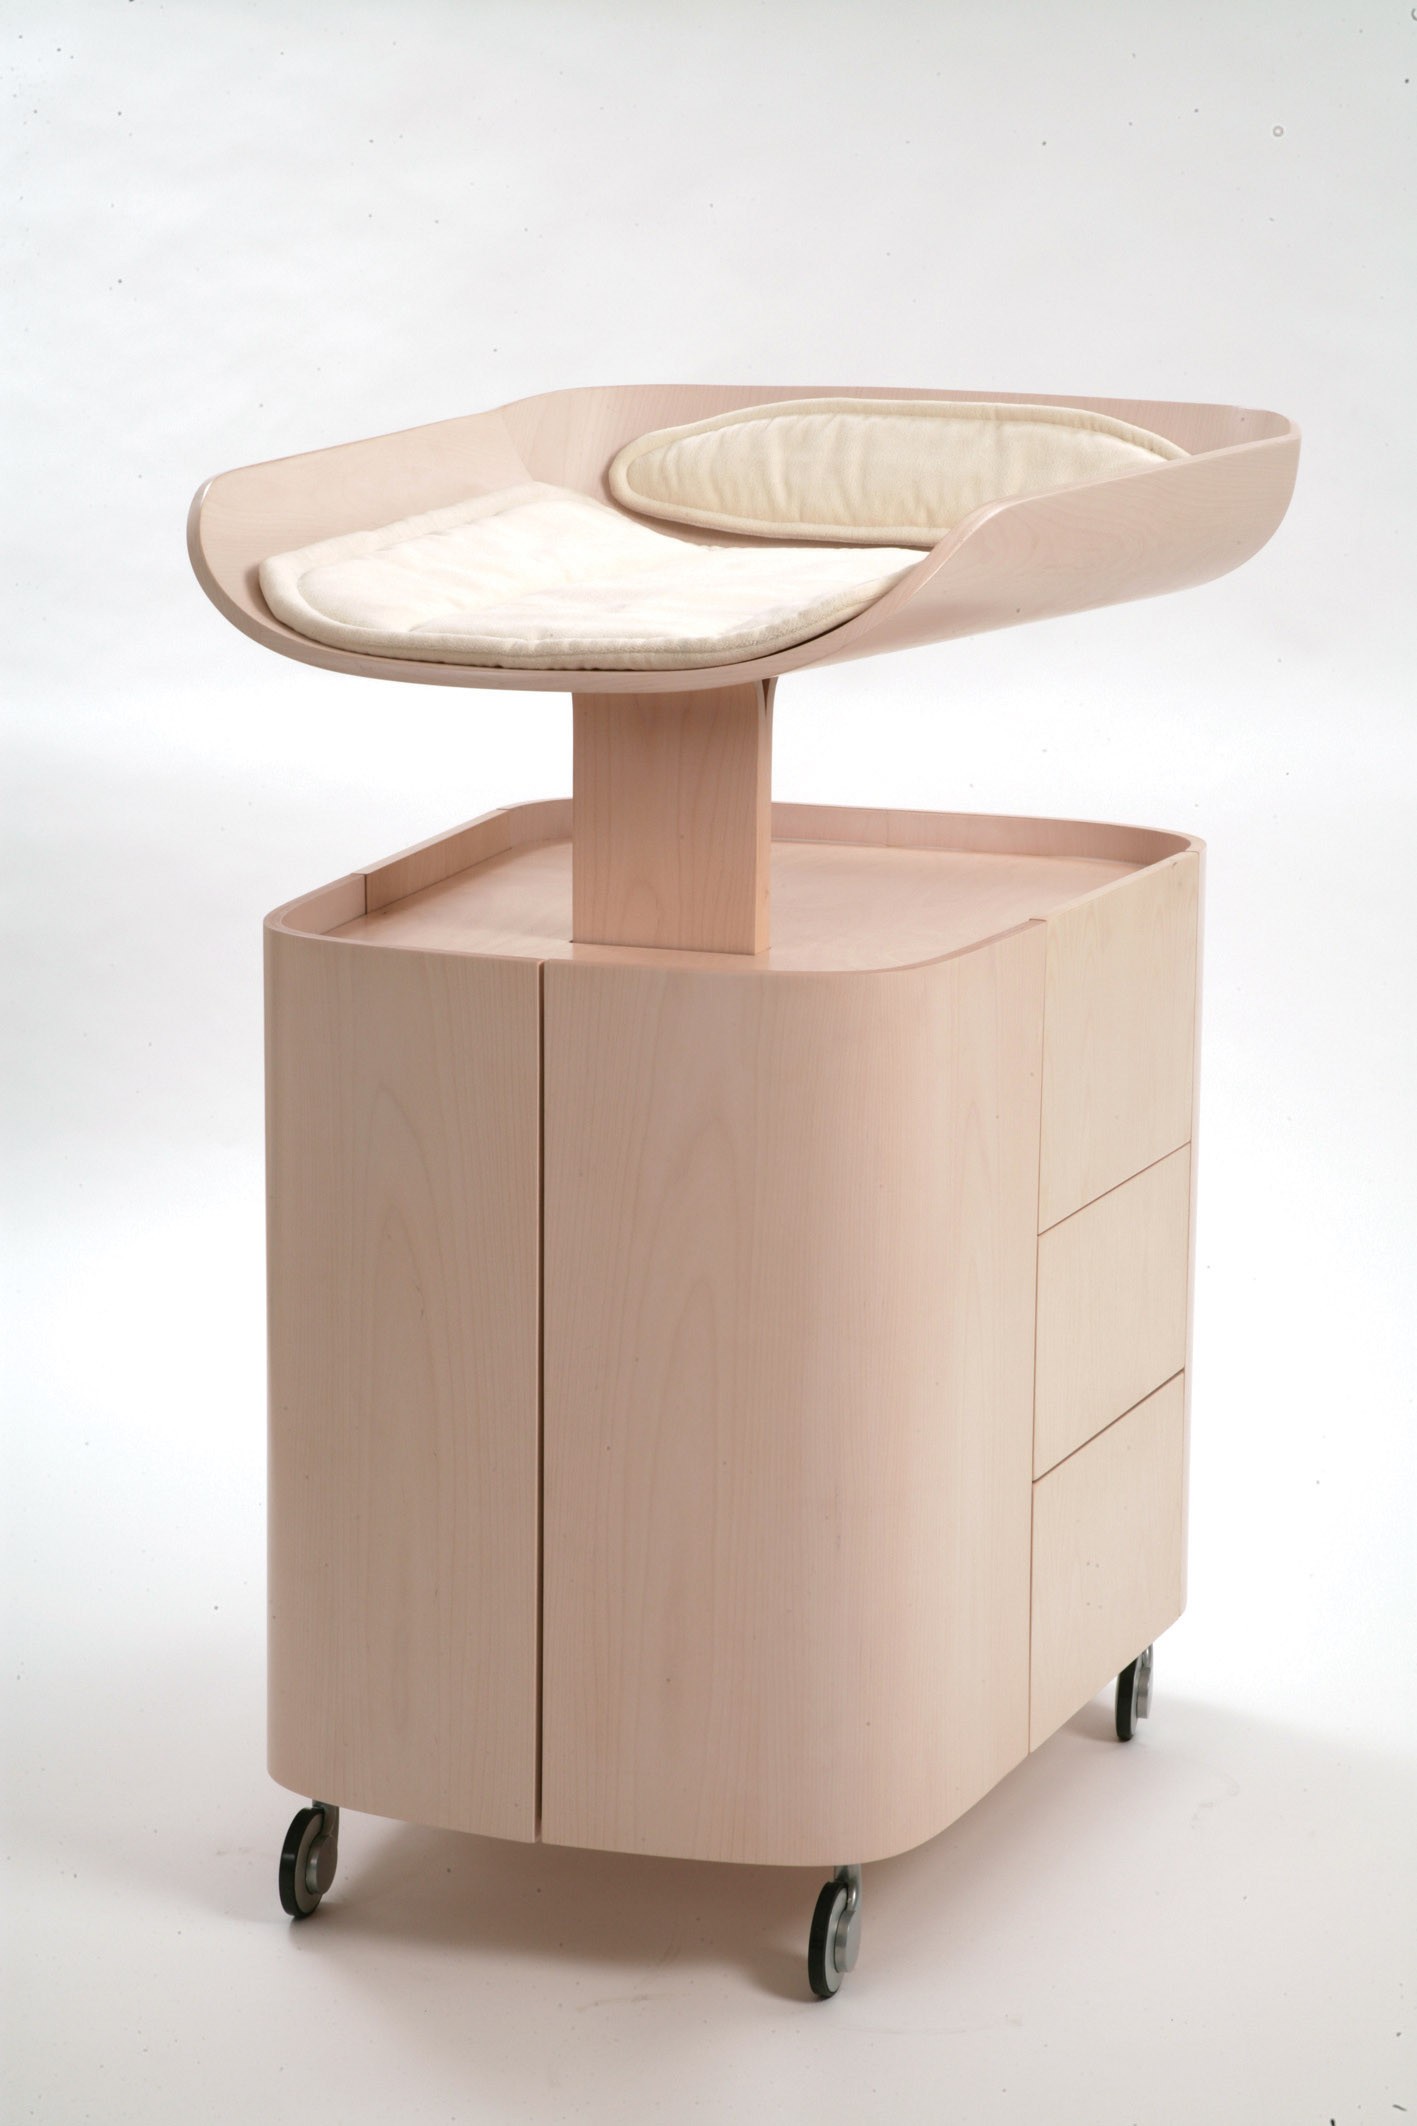 Ergonomic baby changing tables by bybo digsdigs